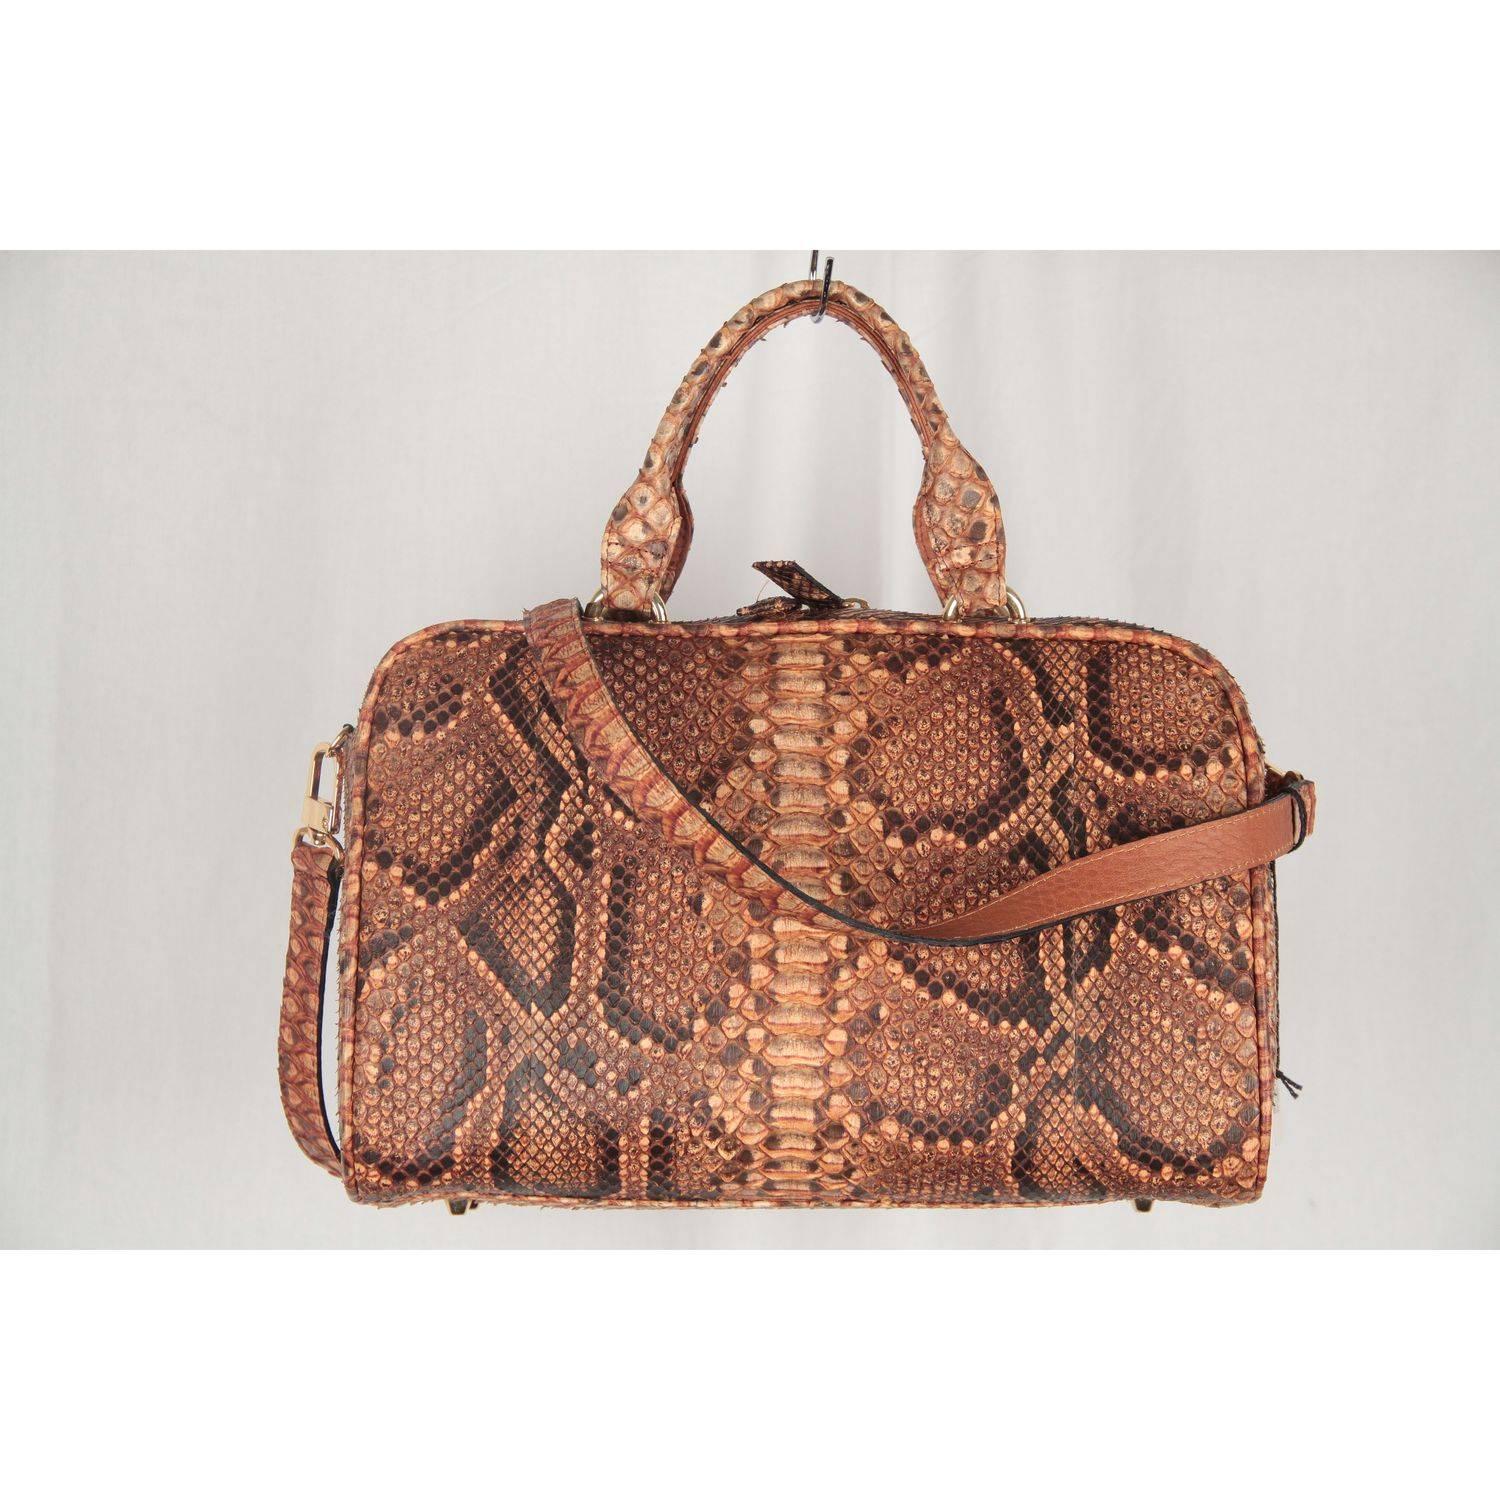 Stunning reptile satchel bag - Made in Italy - in tan snakeskin. It features a double zipper closure on top, gold tone hardware, double python handles and 4 bottom feet base. Lined with beige suede. Internally, it has 2 main compartment and 1 zip